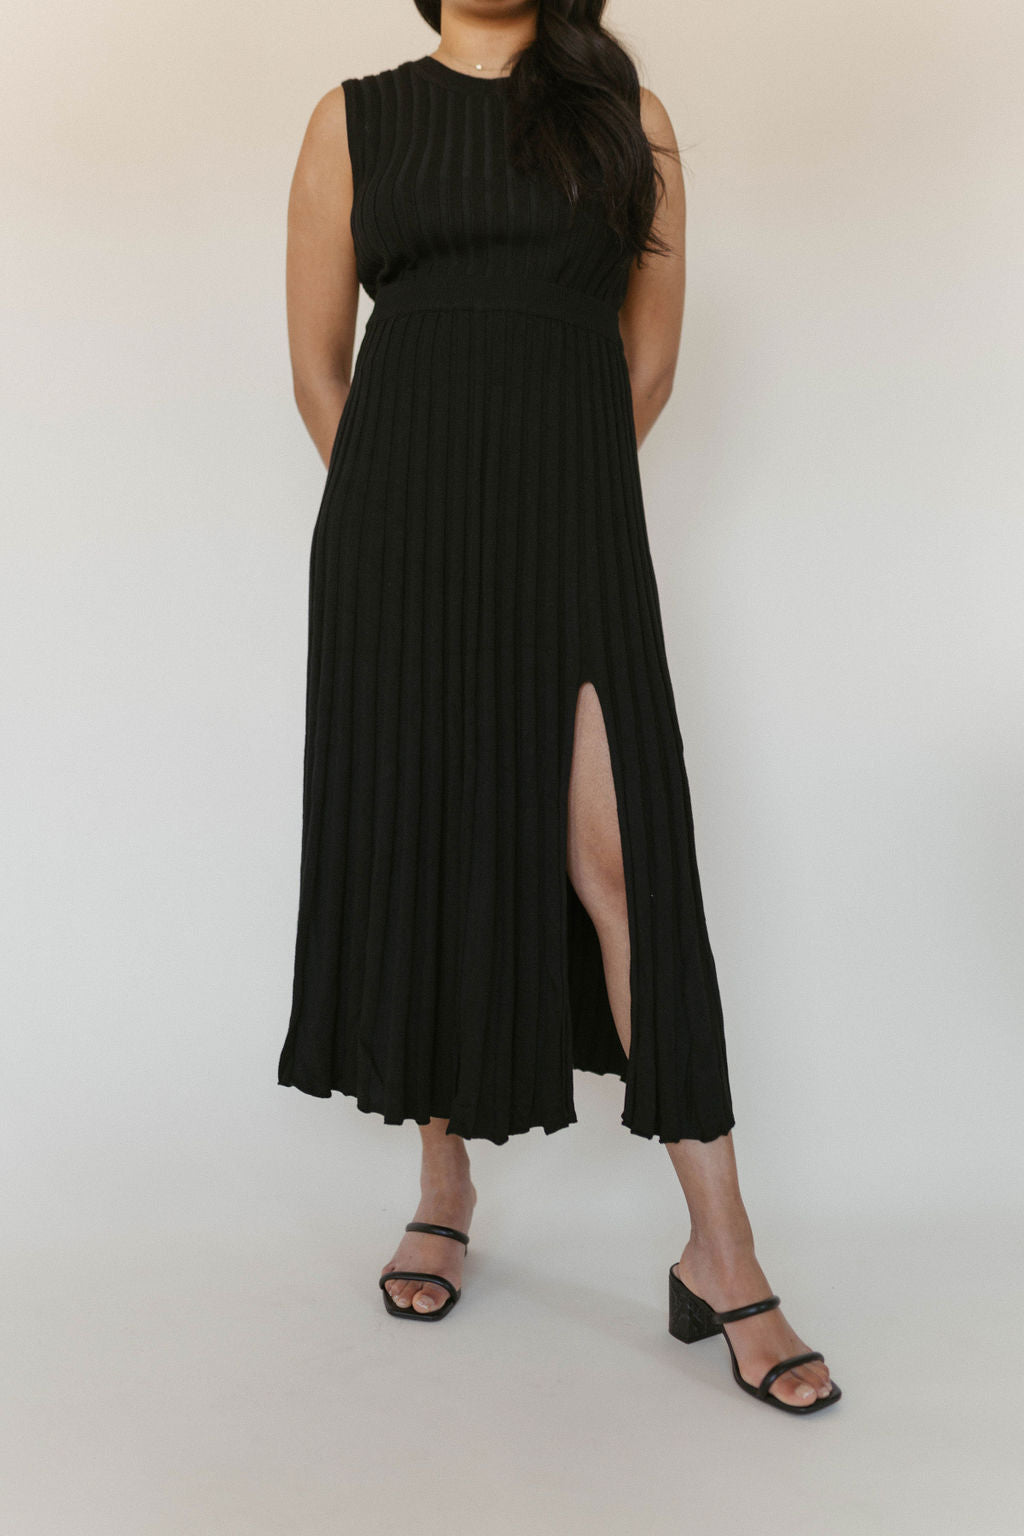 knit ribbed skirt with slit